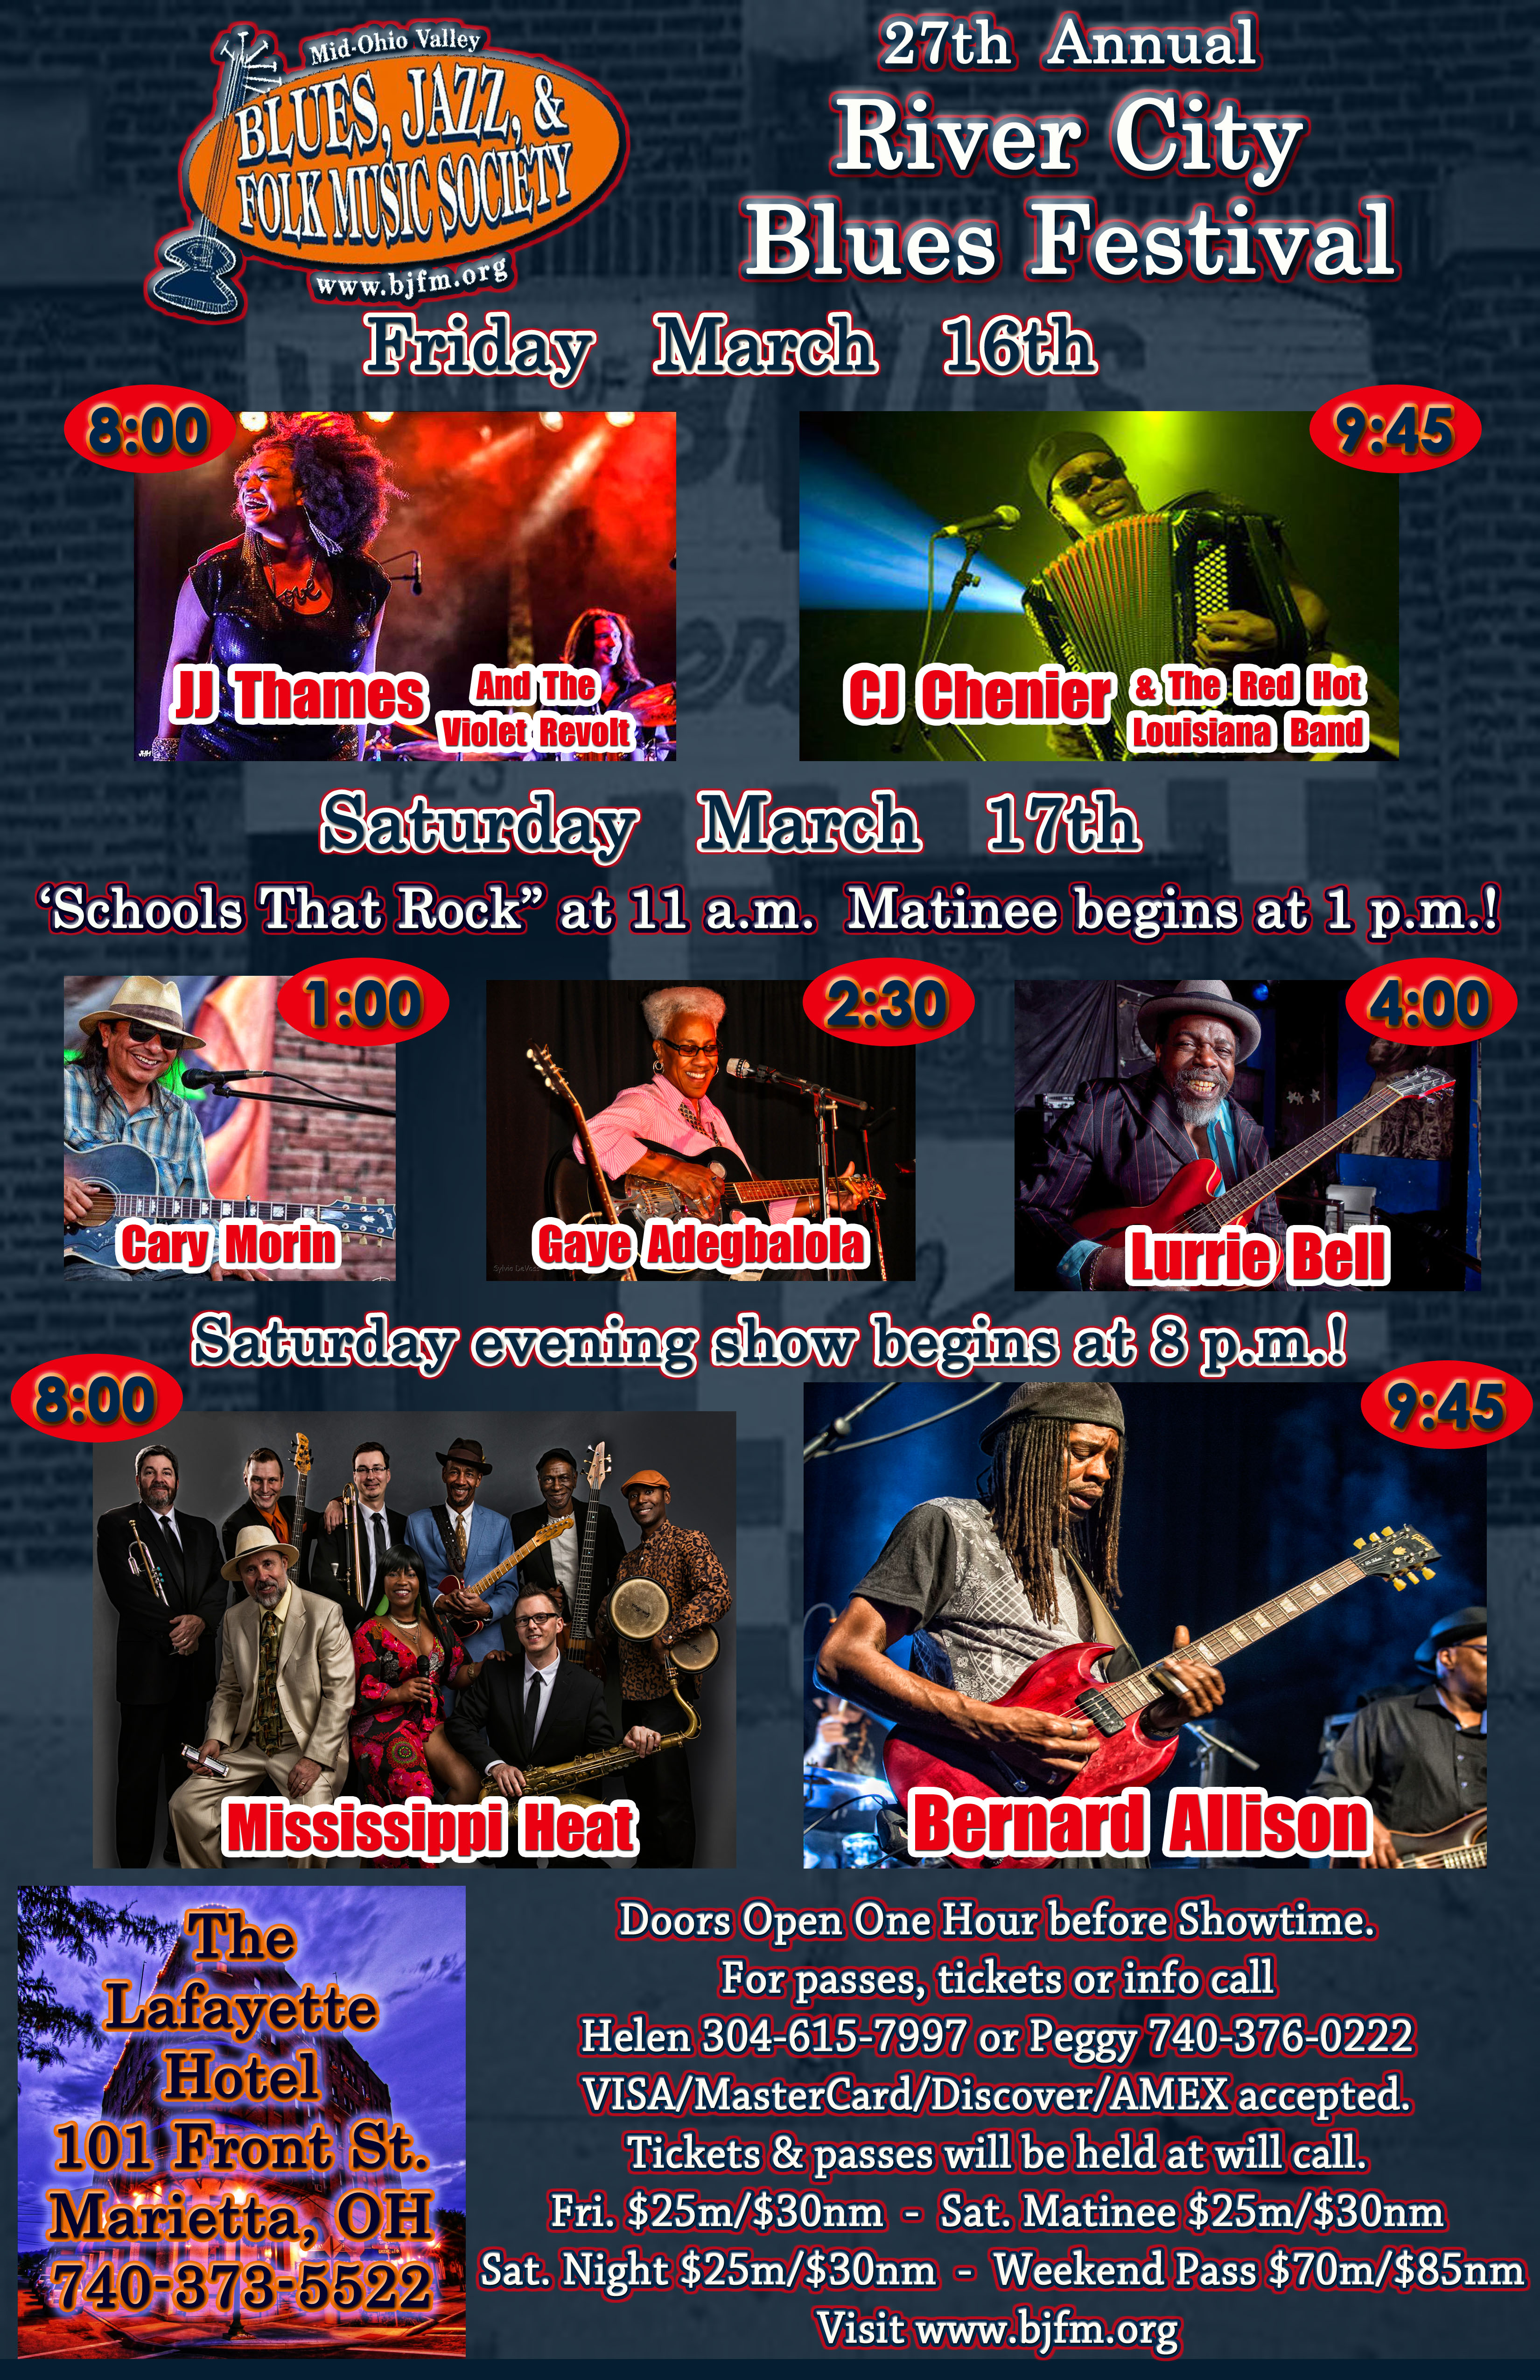 27th Annual River City Blues Festival Set for March 16-17 - WOUB Public ...